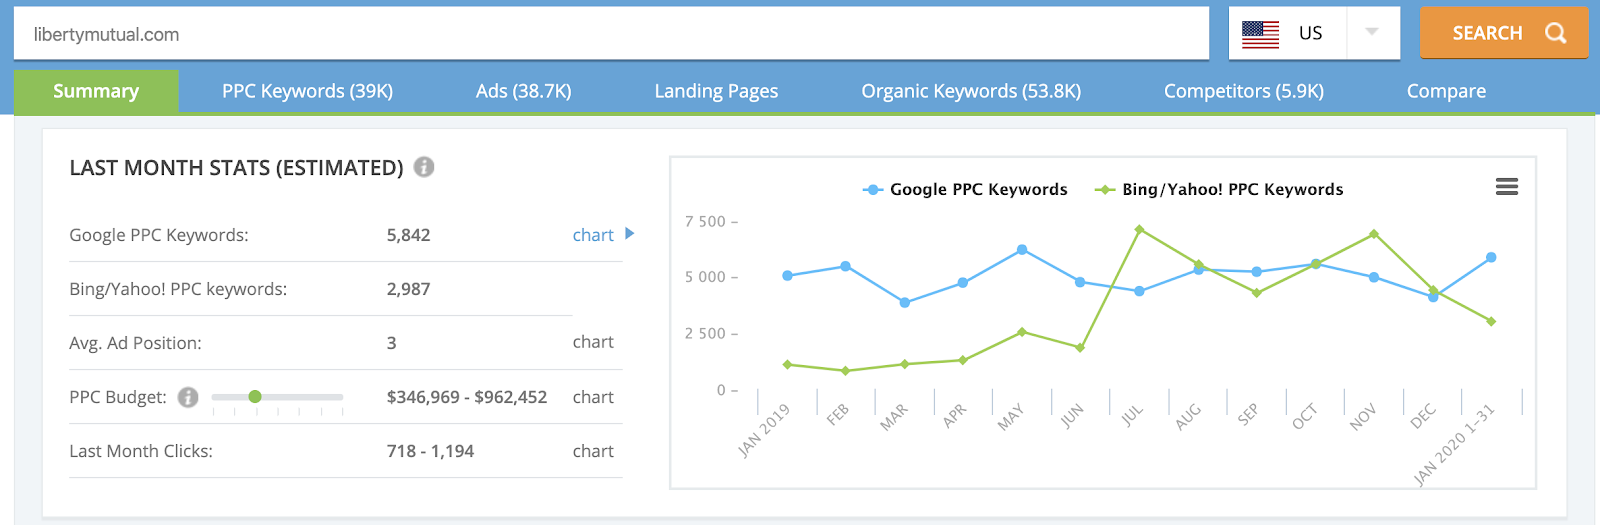 iSpionage Summary: See the previous month's stats for keywords, budget, and positioning.